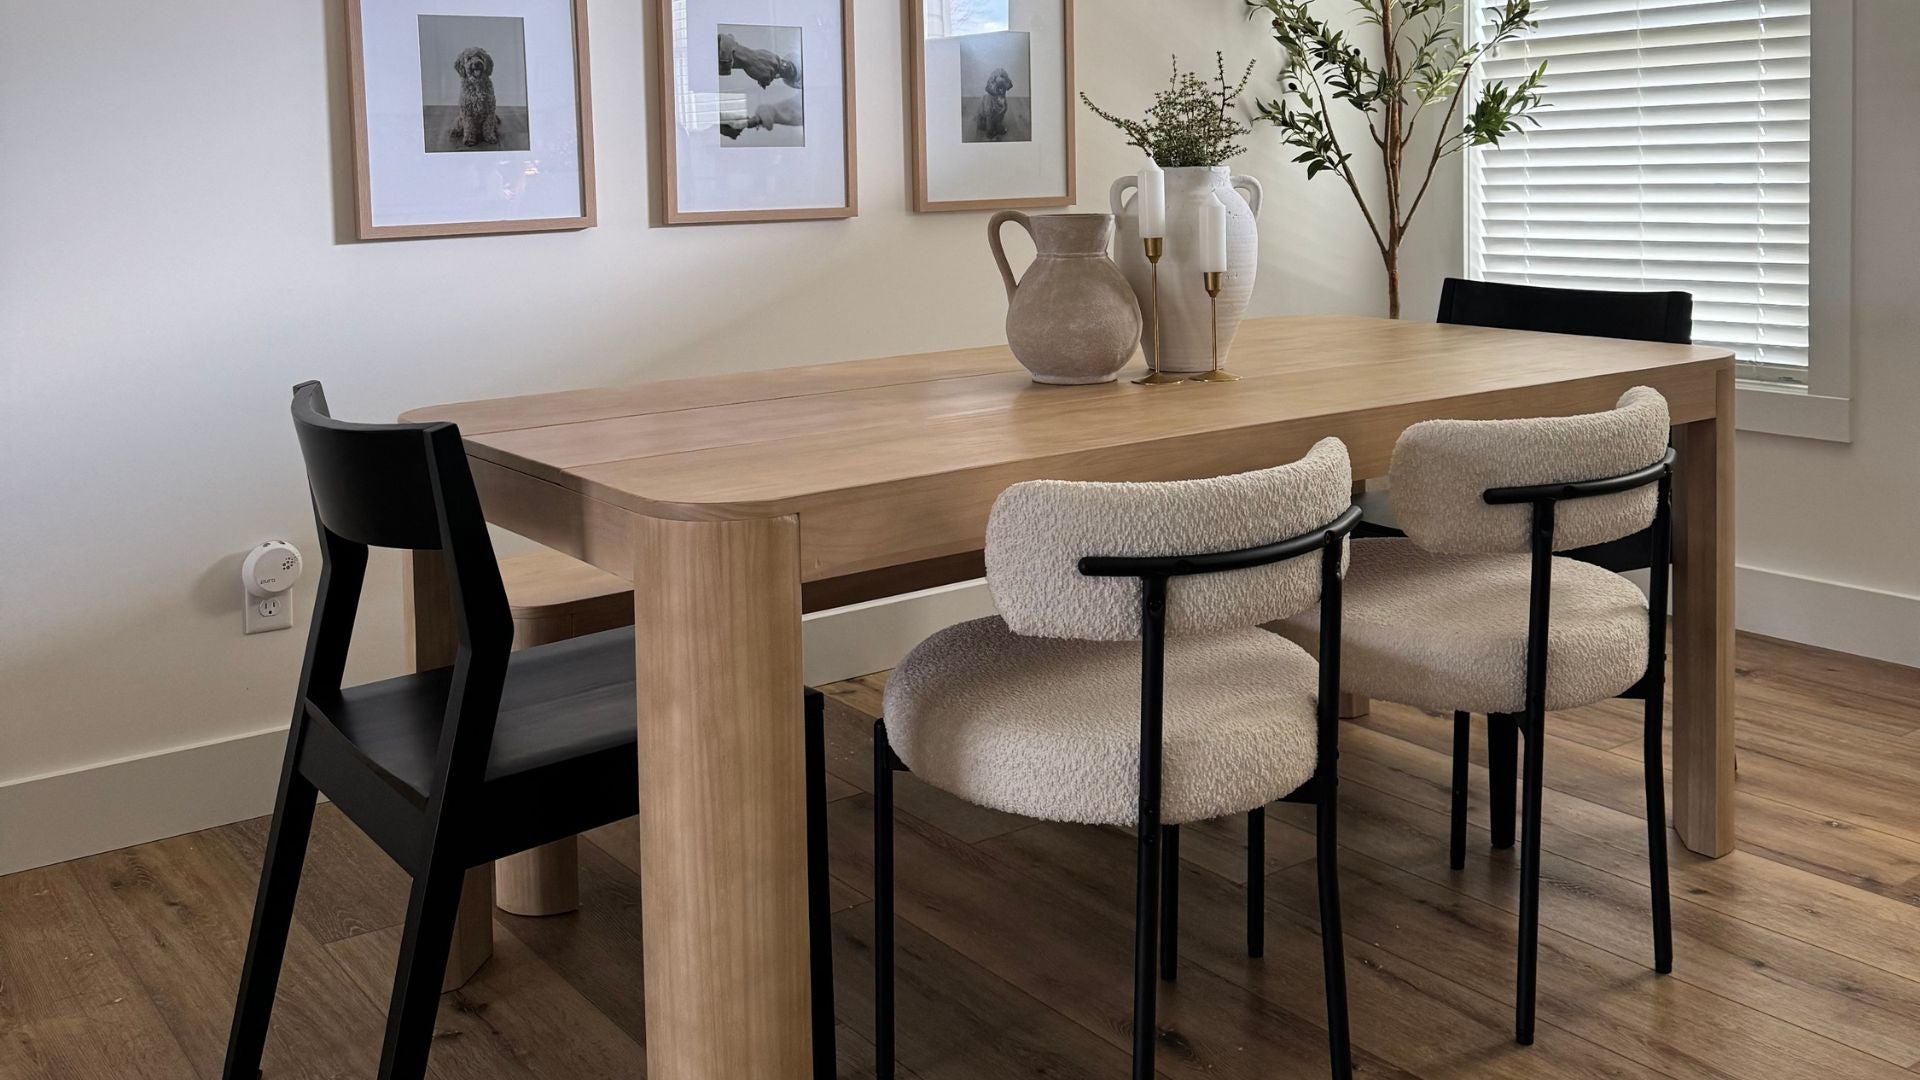 natural wood table with black dining chairs